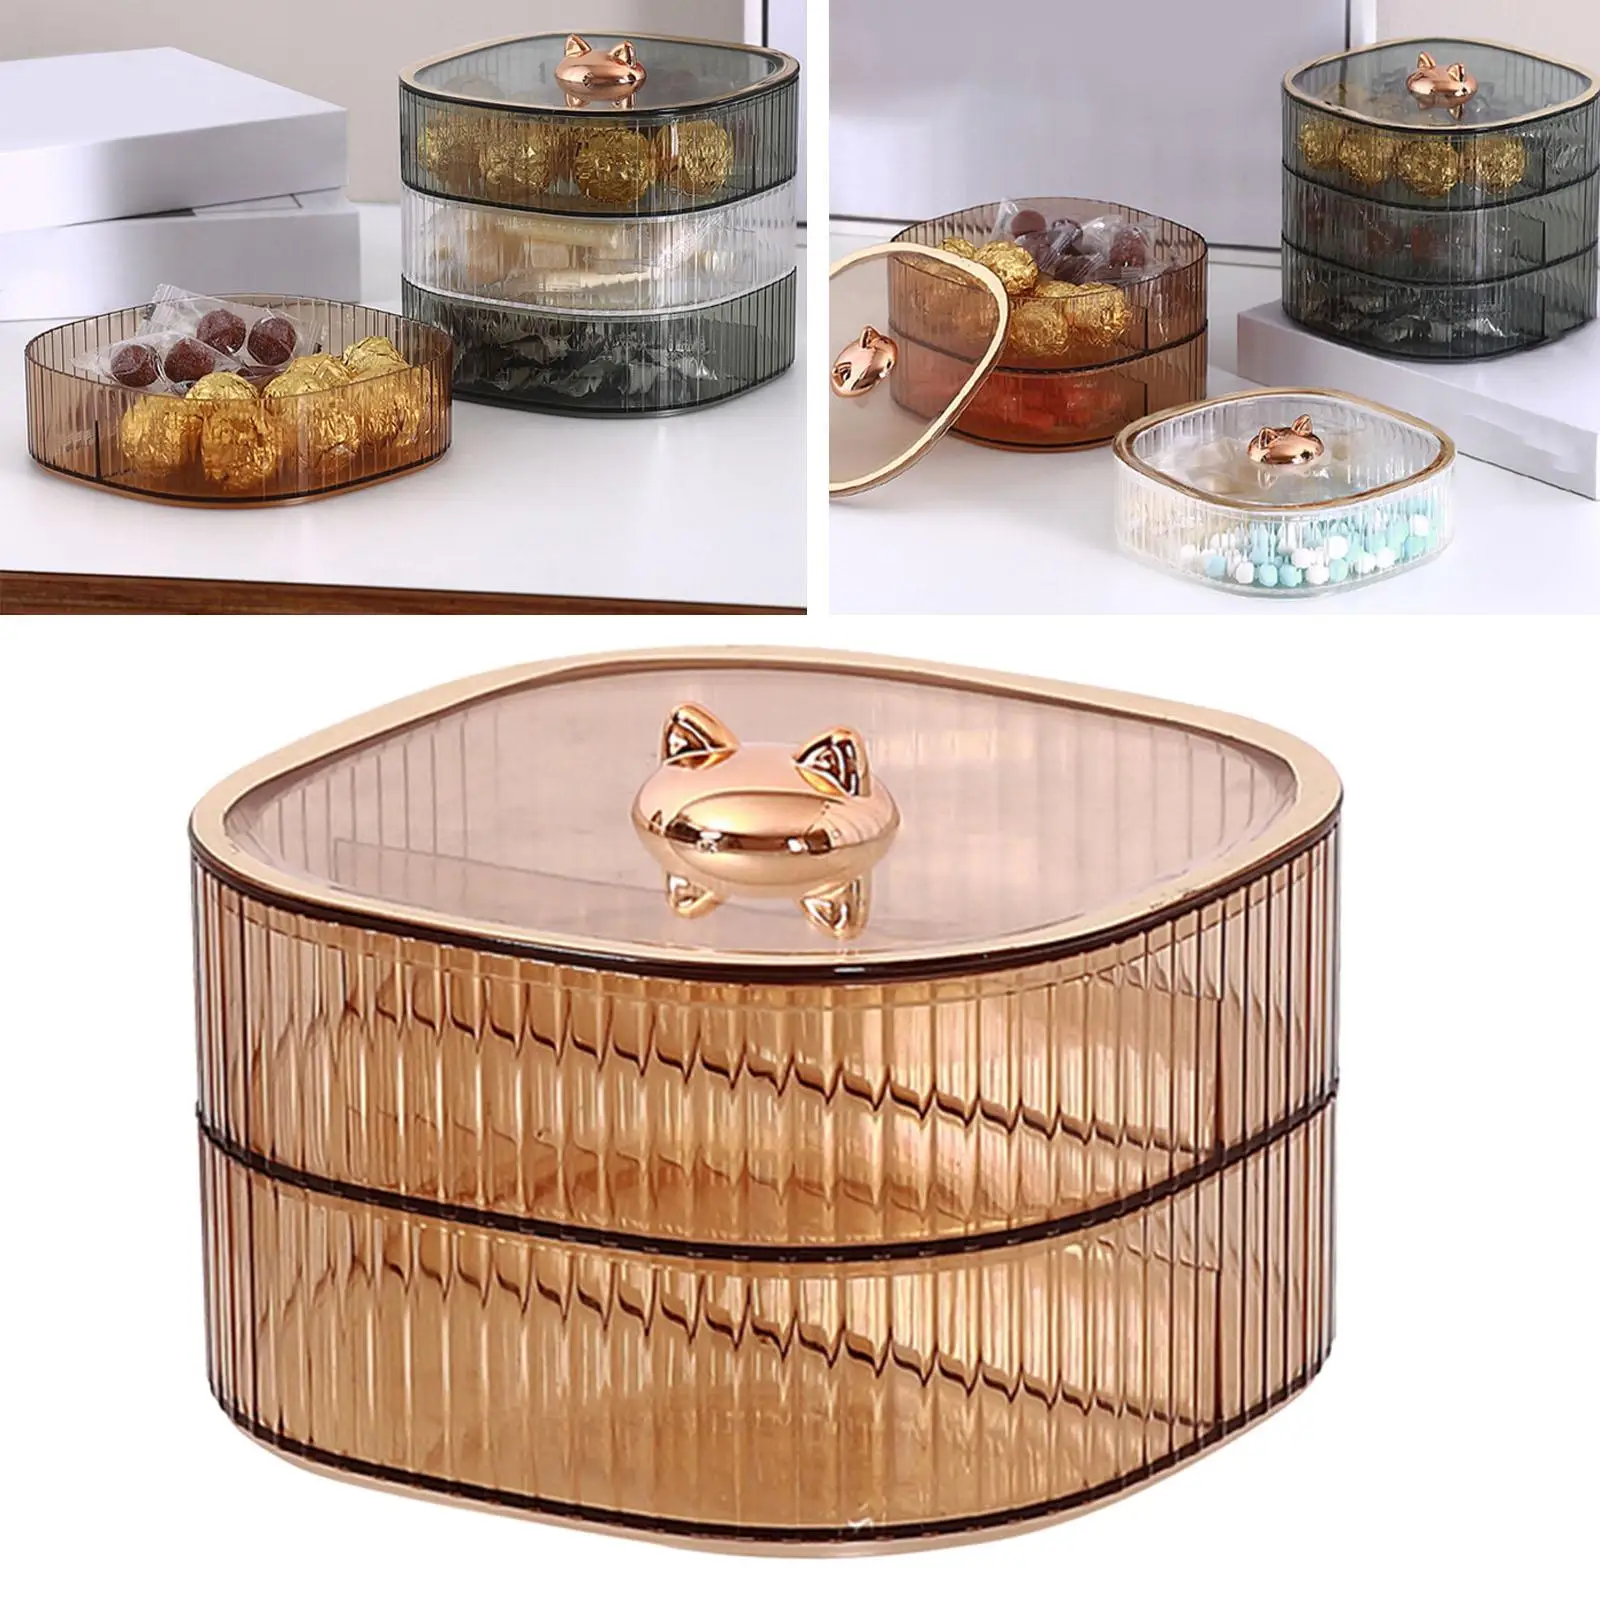 Multifunction Dried Fruit Holder Tray Organizer with Cover,Fruit Plate,2 Tiers Serving Dish Tray Platter